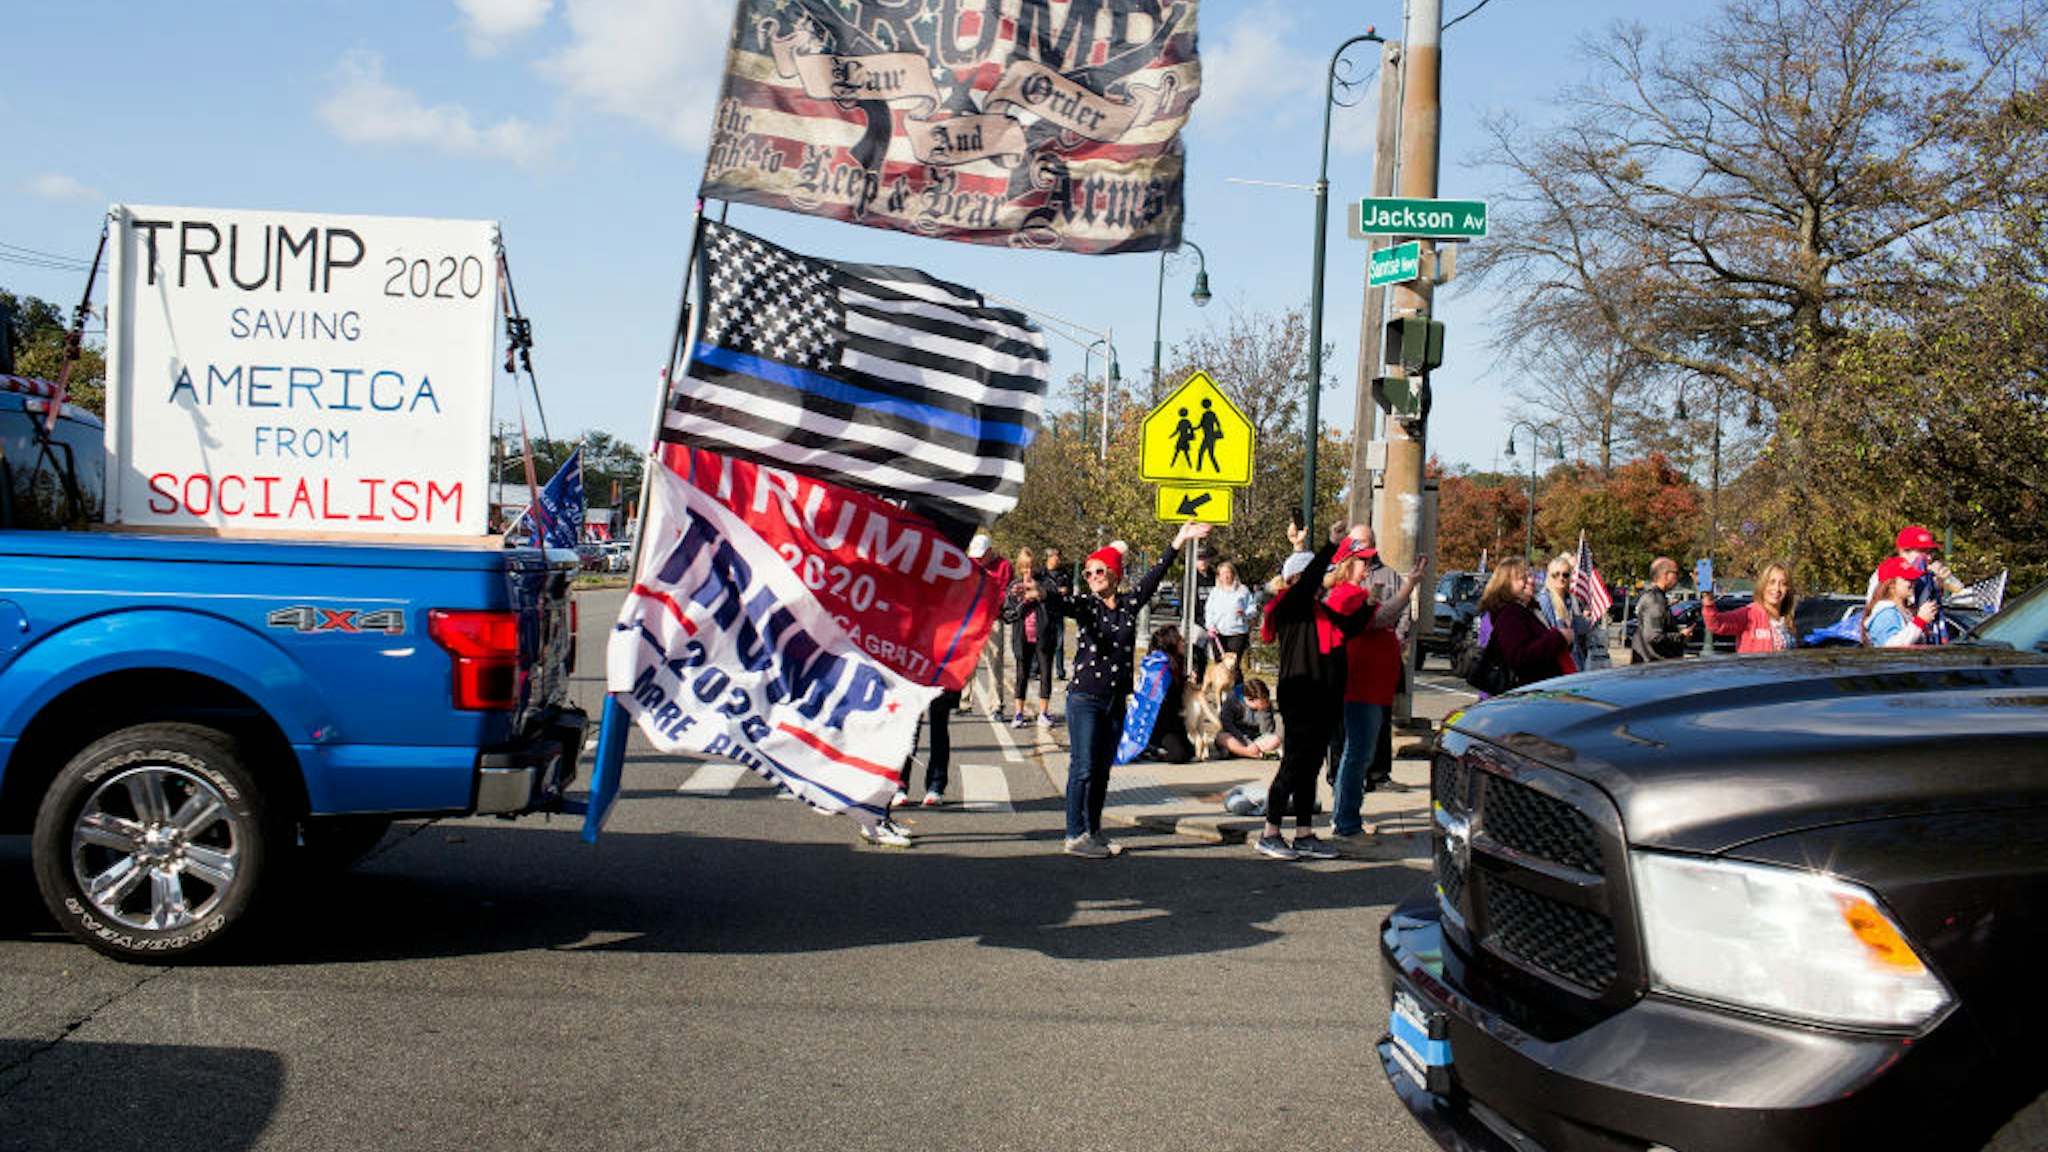 Trump supporters gather in a Long Island Rail Road parking lot before driving in cars as part of a caravan on October 18, 2020 in Seaford, New York.